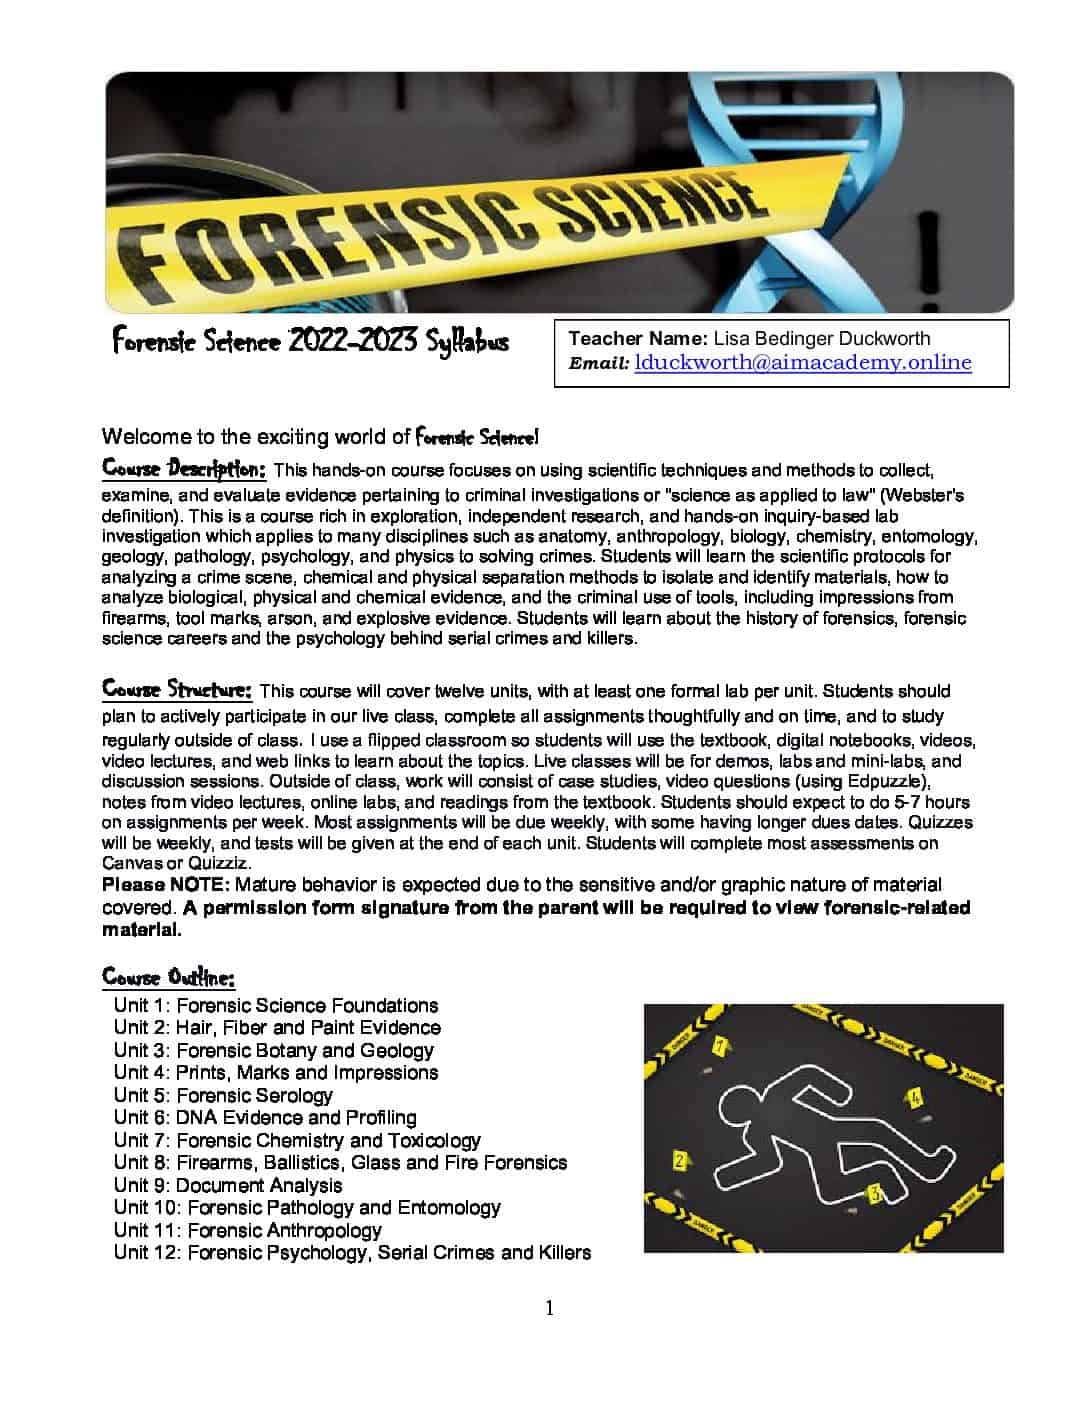 Forensic Science | Aim Academy Online